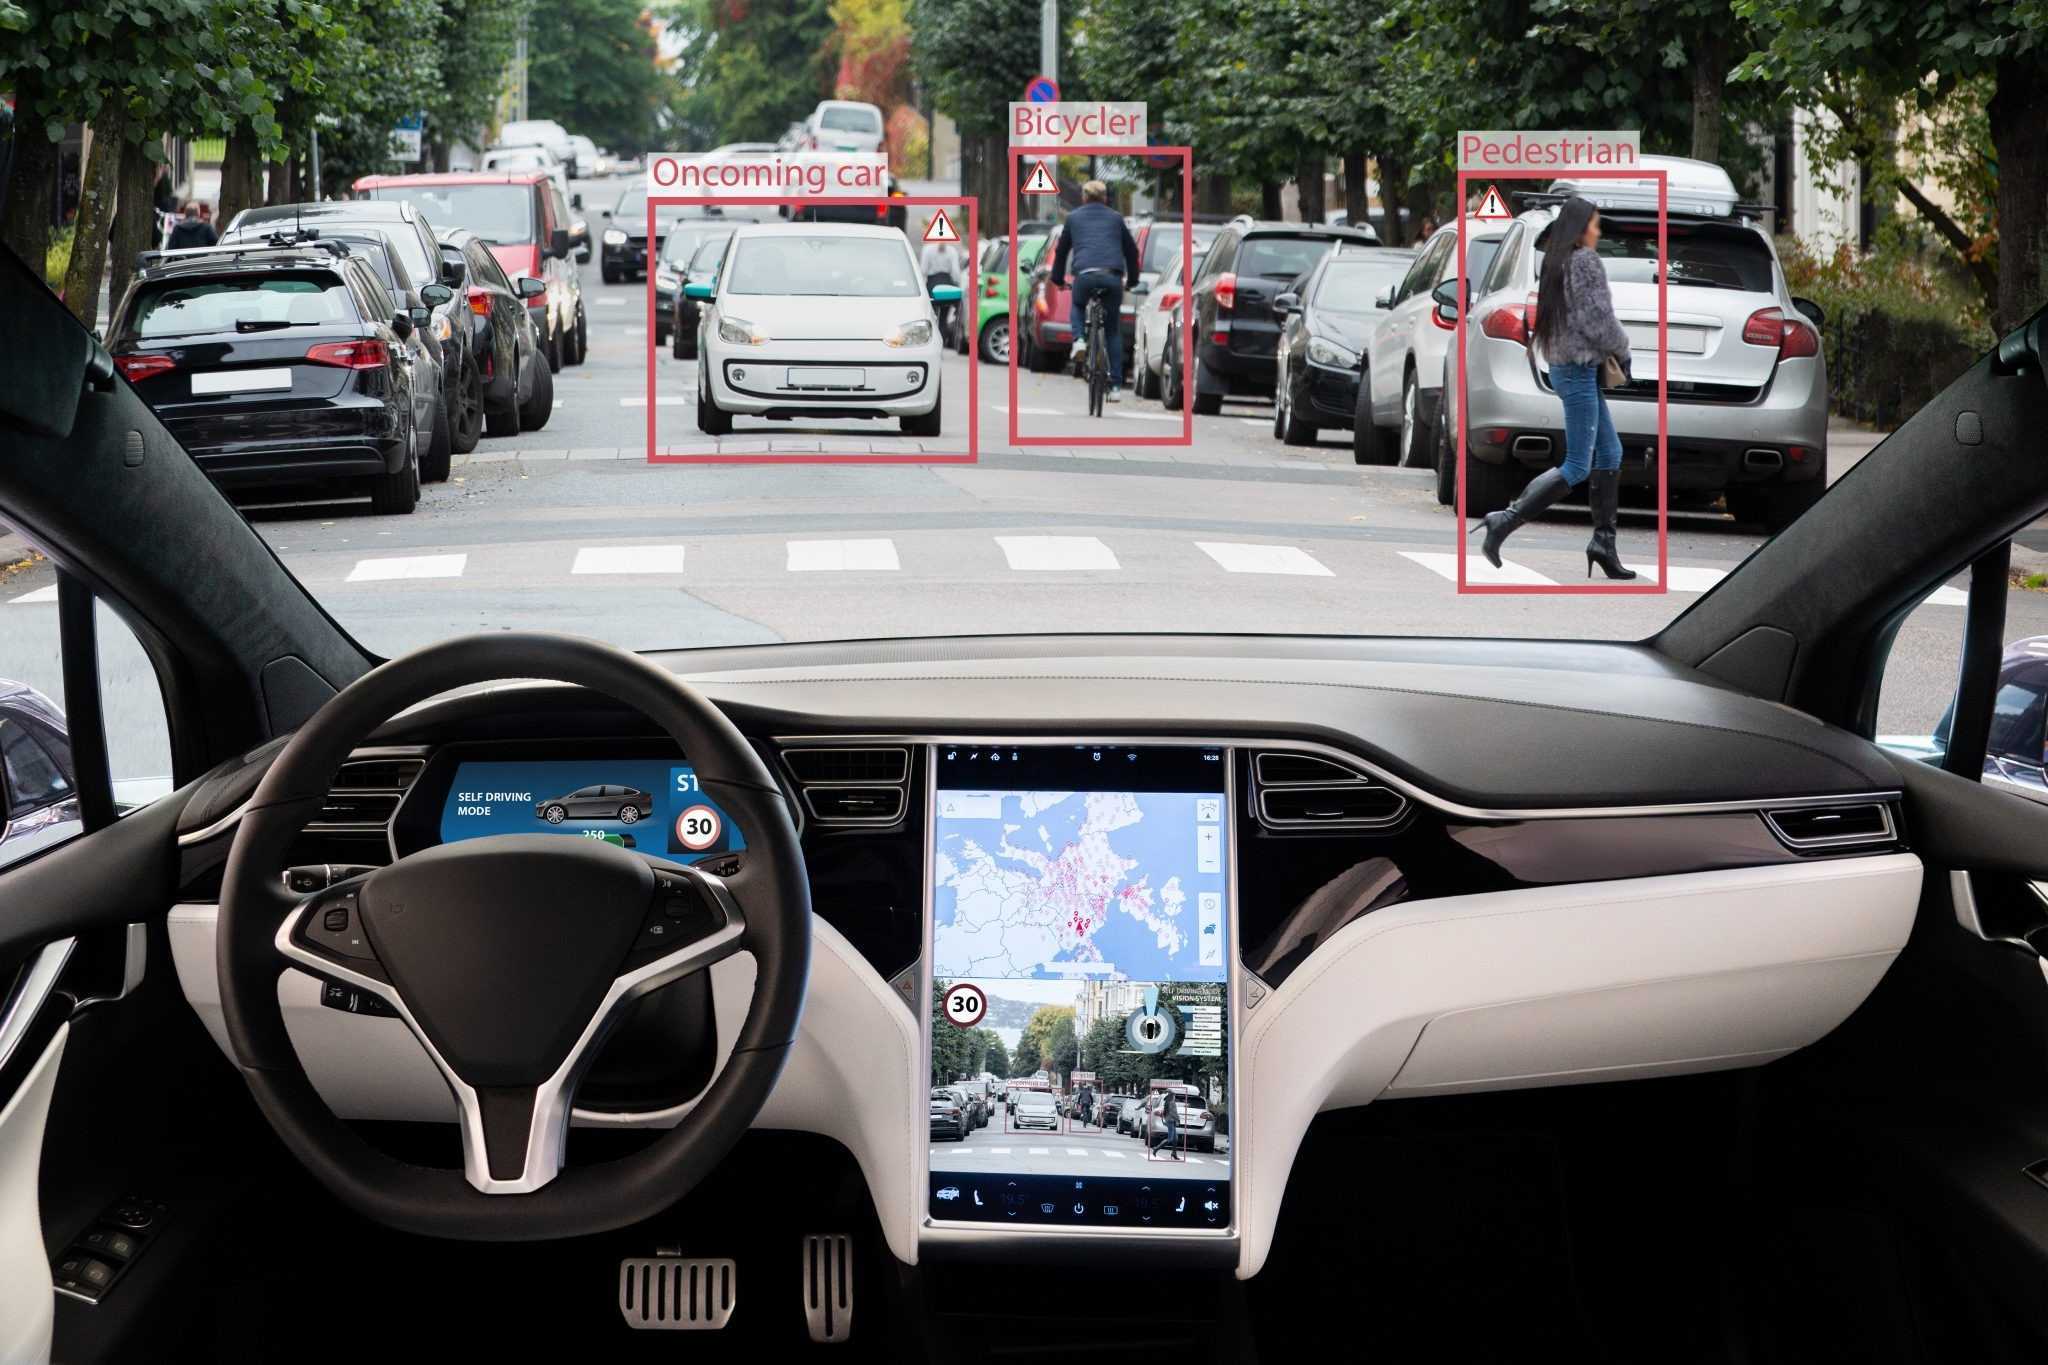 Who Is Liable When a Self-Driving Car Causes a Crash?